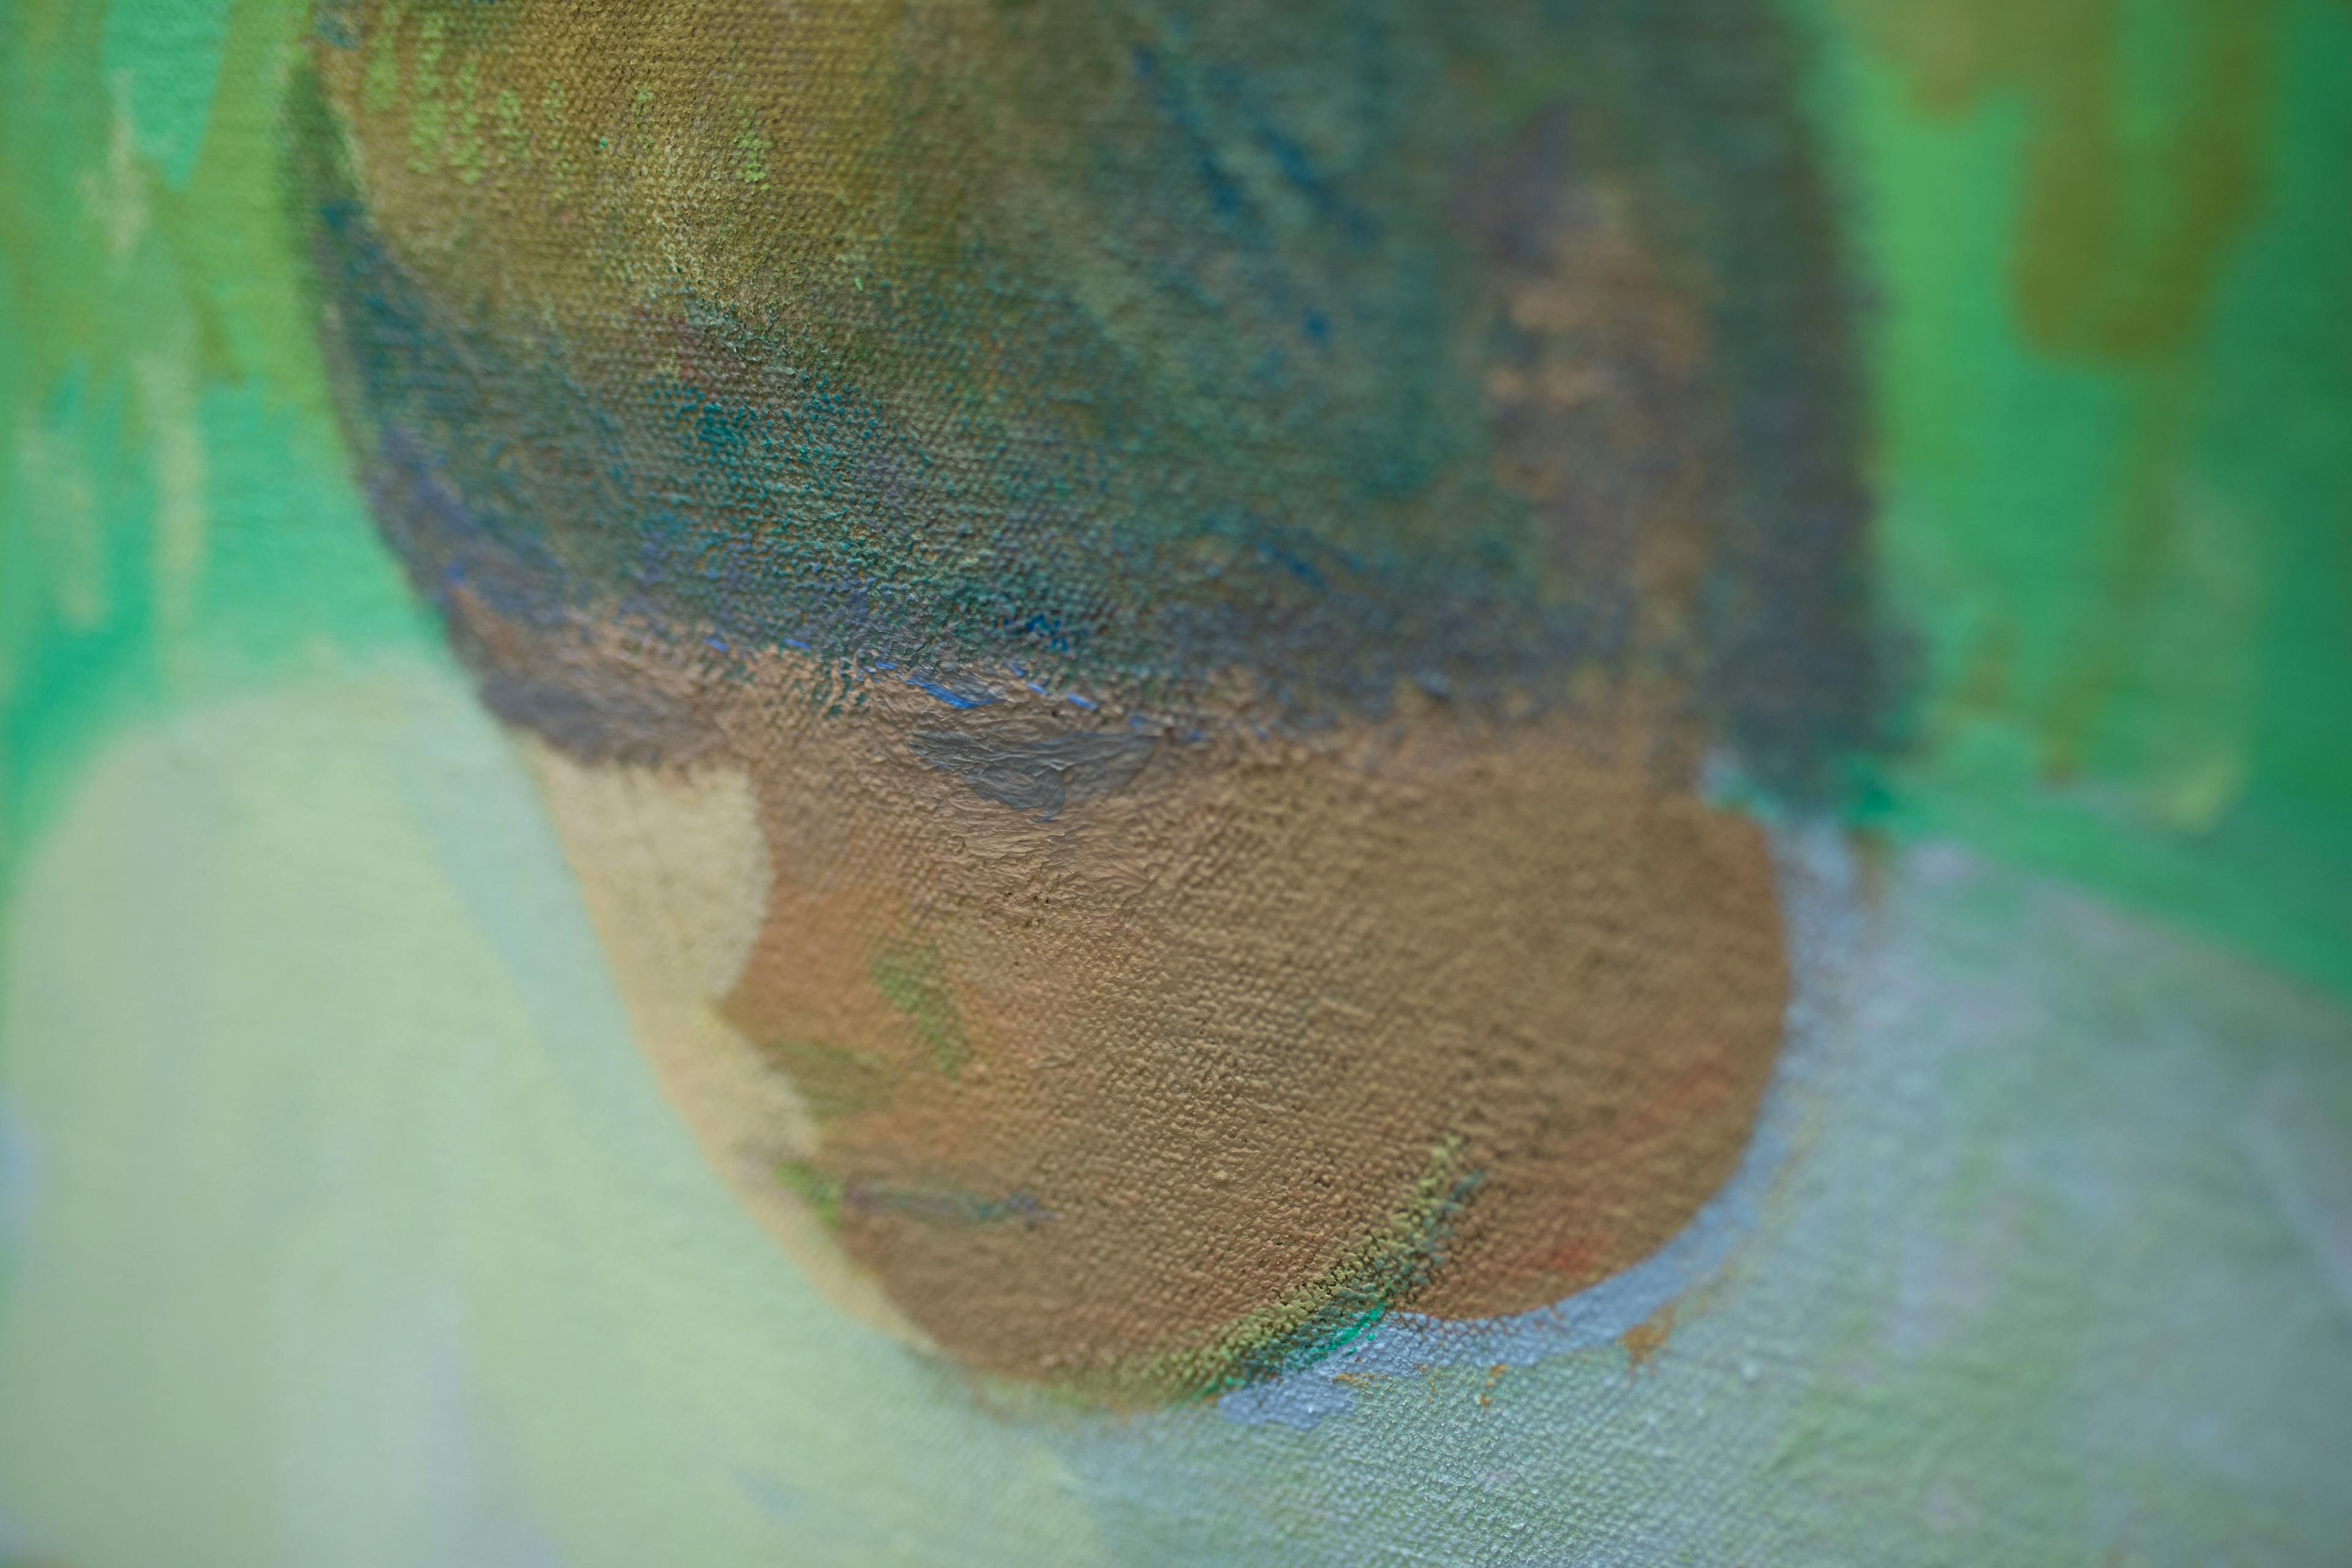 A close-up of a boy's face within a figurative painting by artist Jackson Joyce.